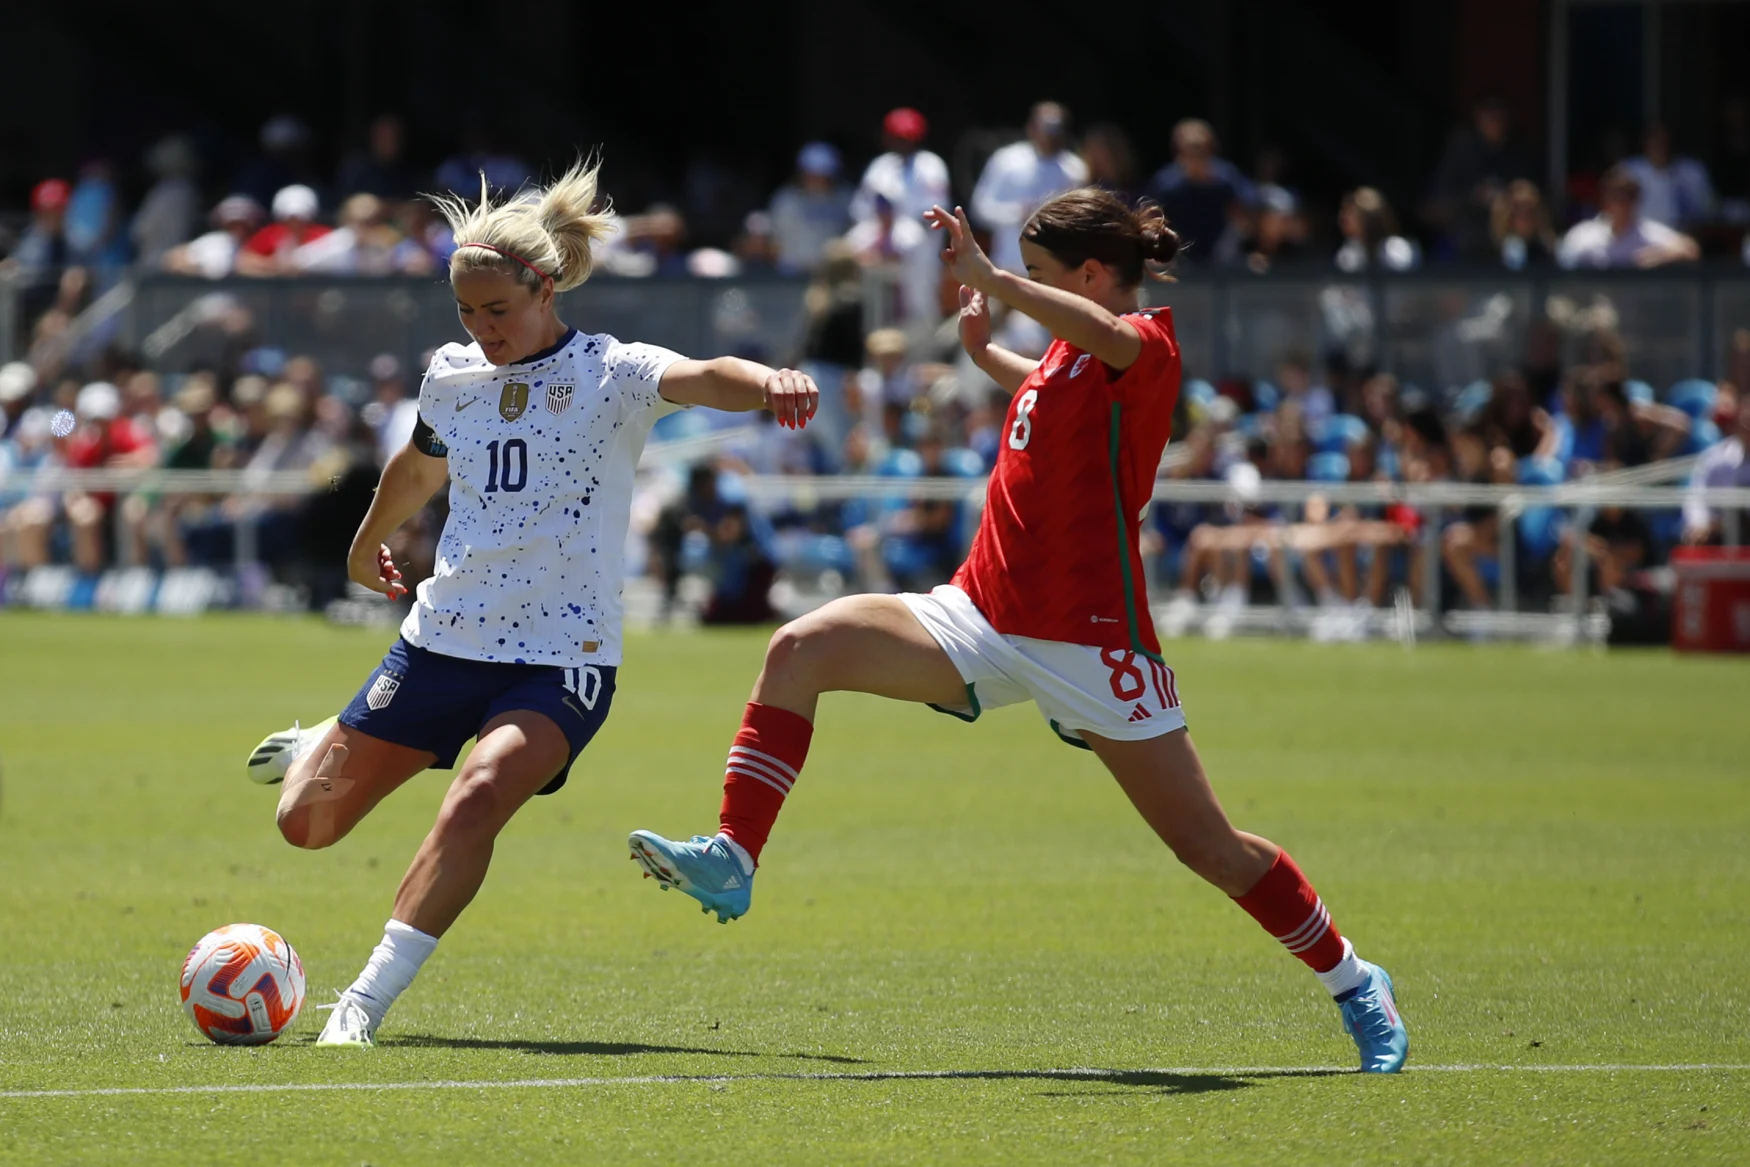 United States' Lindsey Horan (10) takes a shot against Wales' Angharad James (8) in the second half of a FIFA Women's World Cup send-off soccer match in San Jose, Calif., Sunday, July 9, 2023. (AP Photo/Josie Lepe)